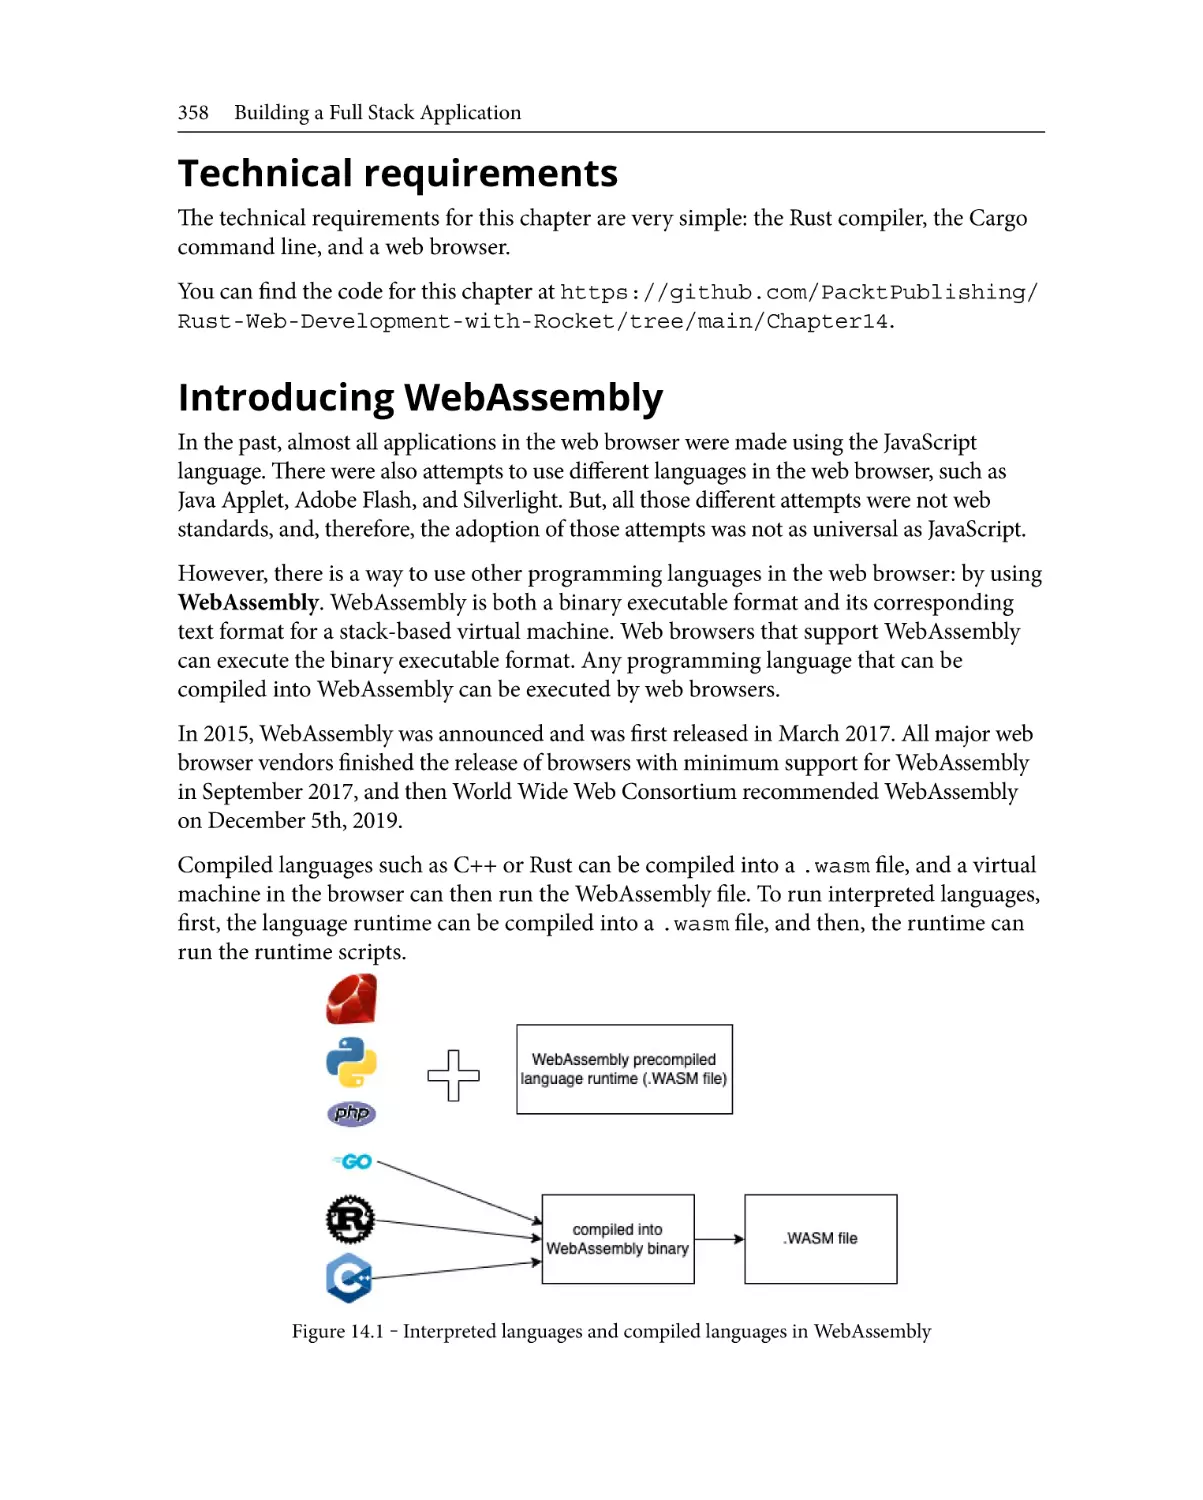 Technical requirements
Introducing WebAssembly